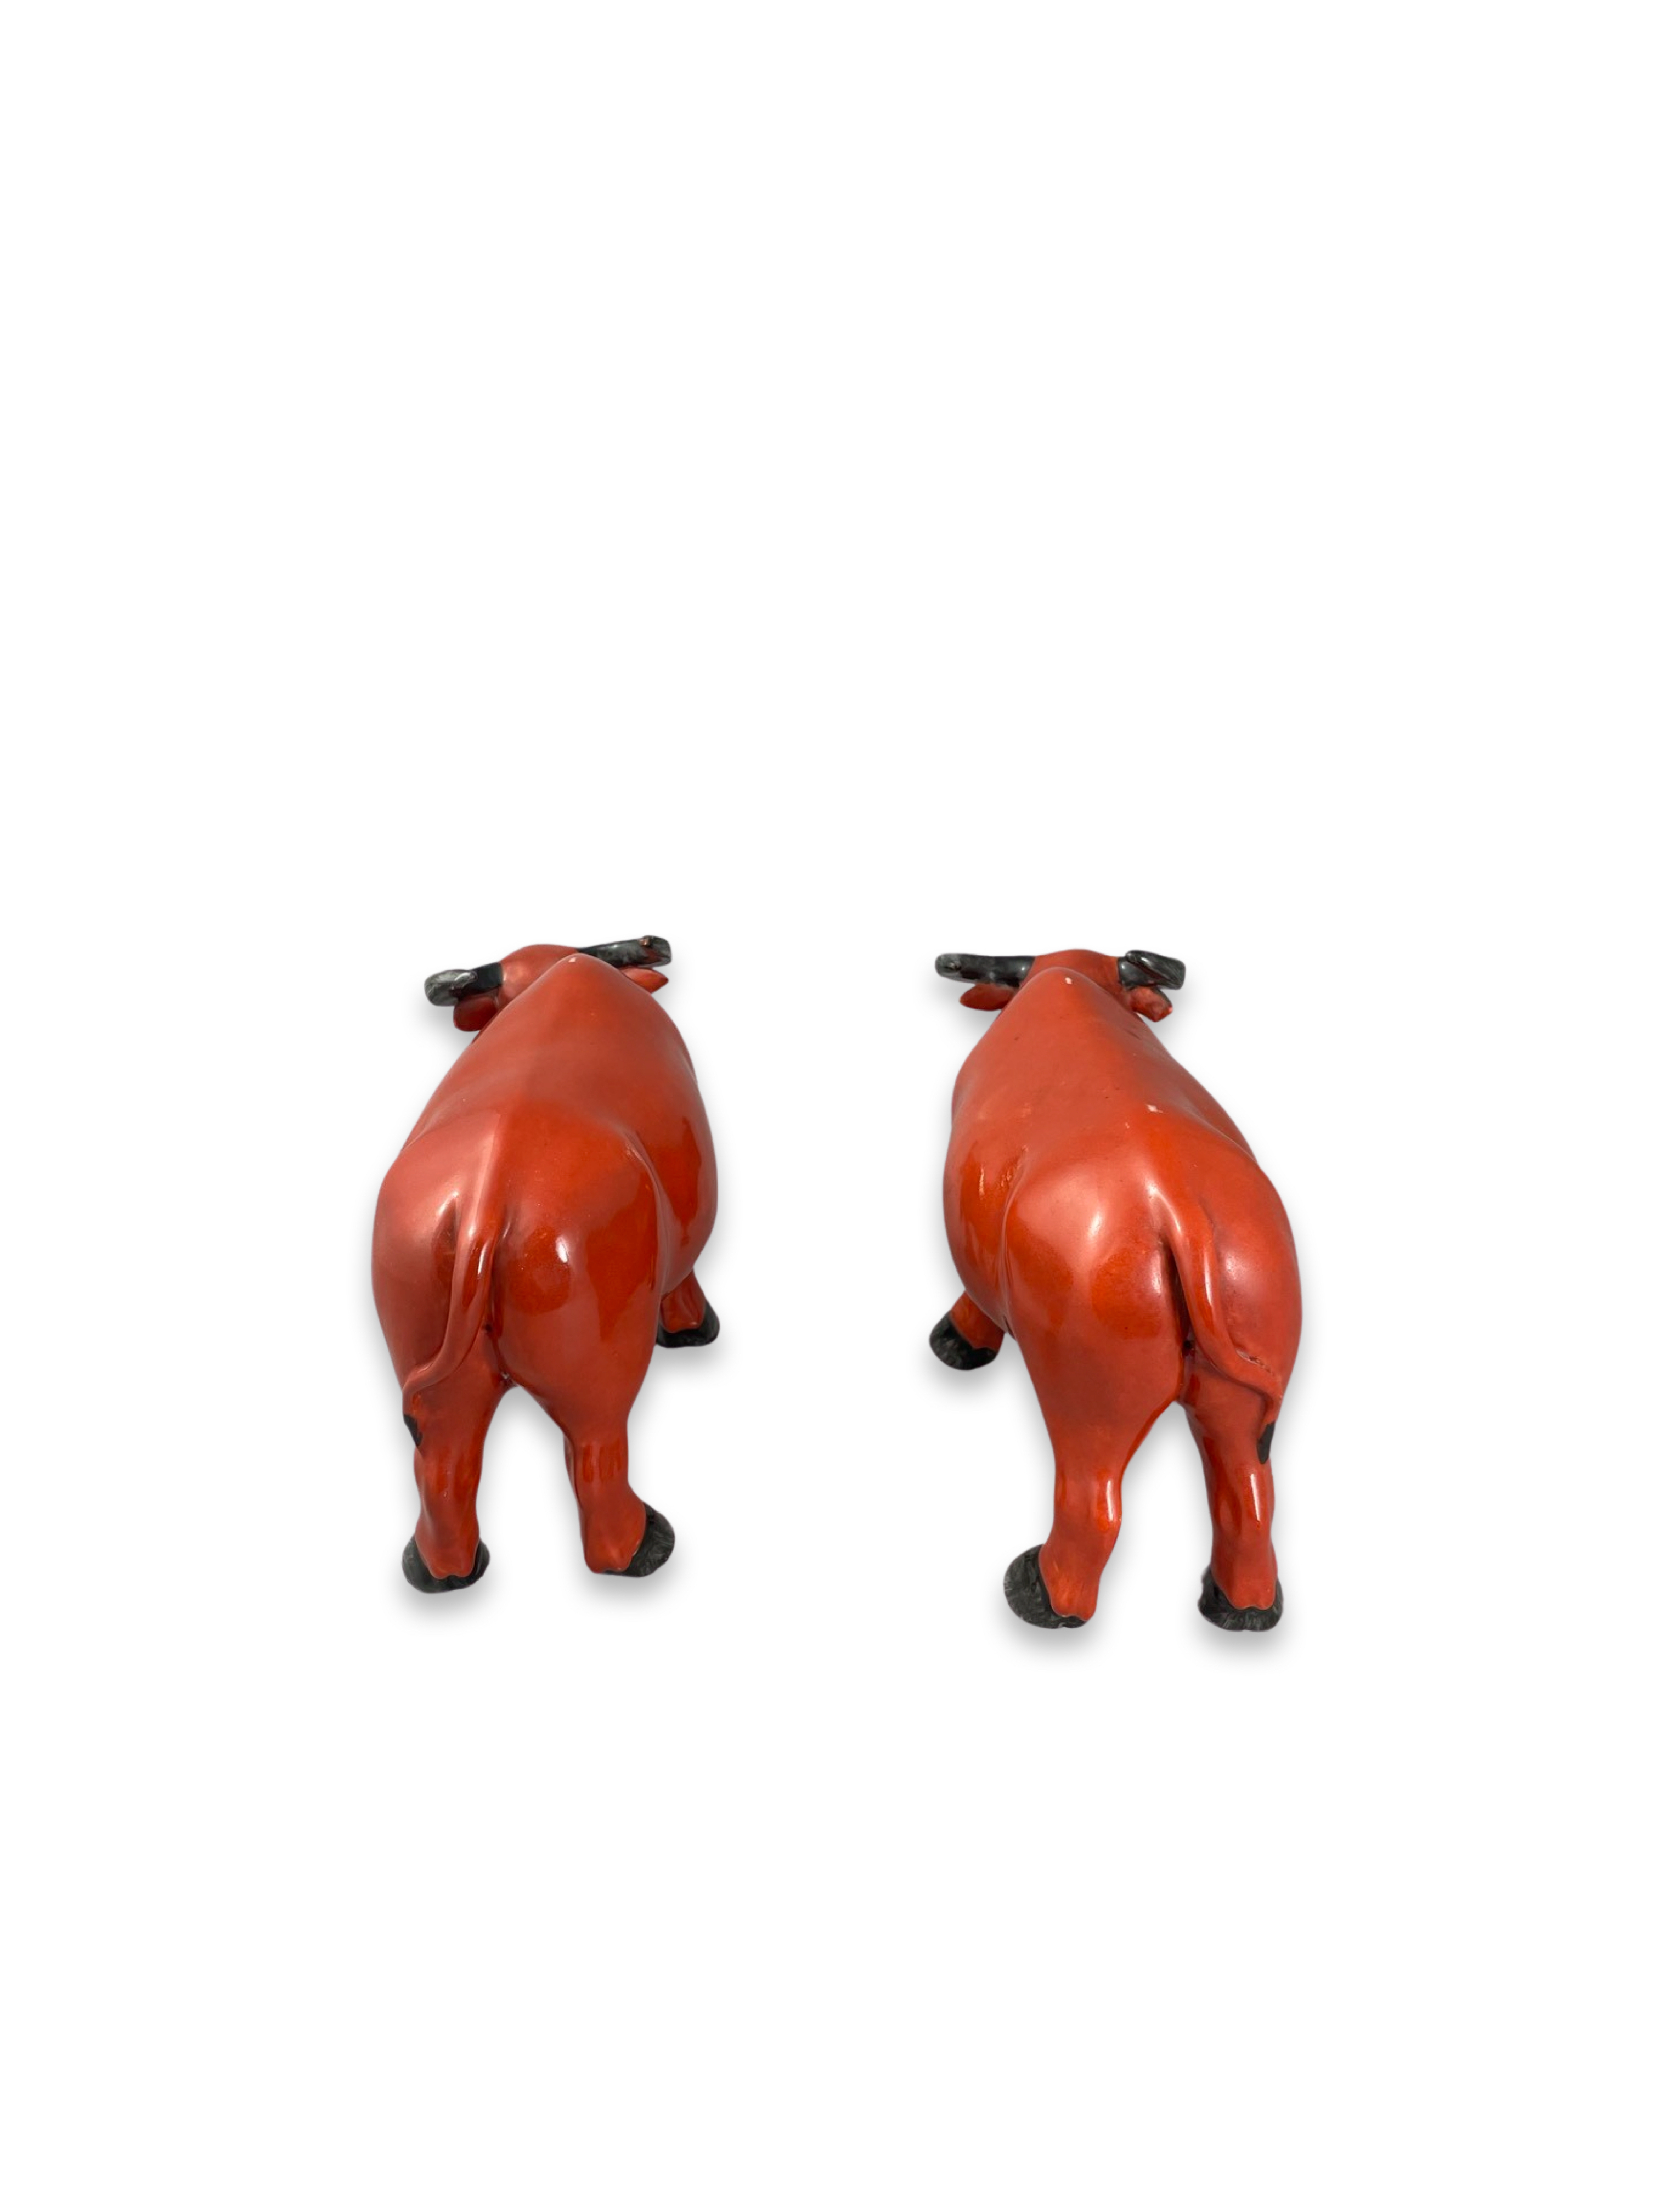 A Pair of Iron Red Buffalo, 19/20th century - Image 4 of 6